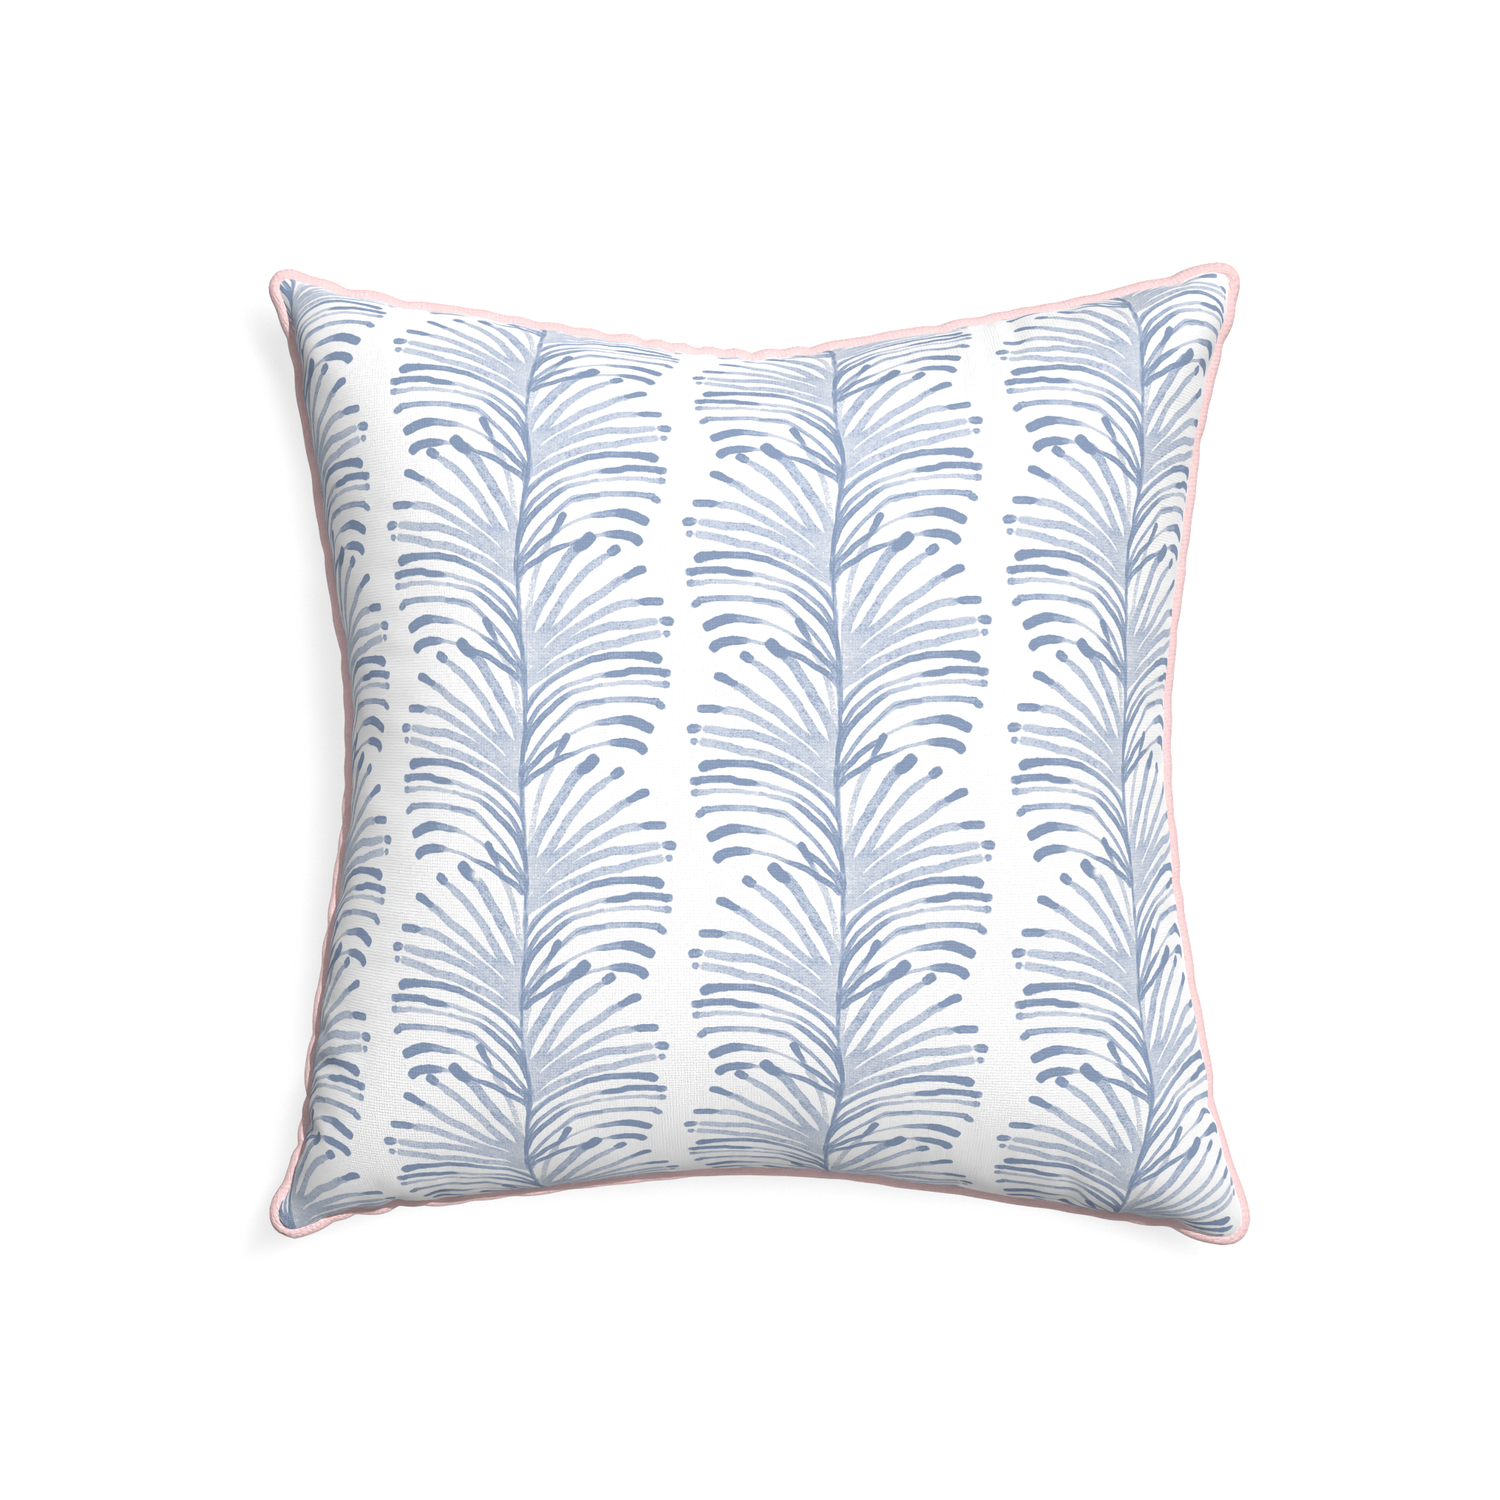 22-square emma sky custom pillow with petal piping on white background